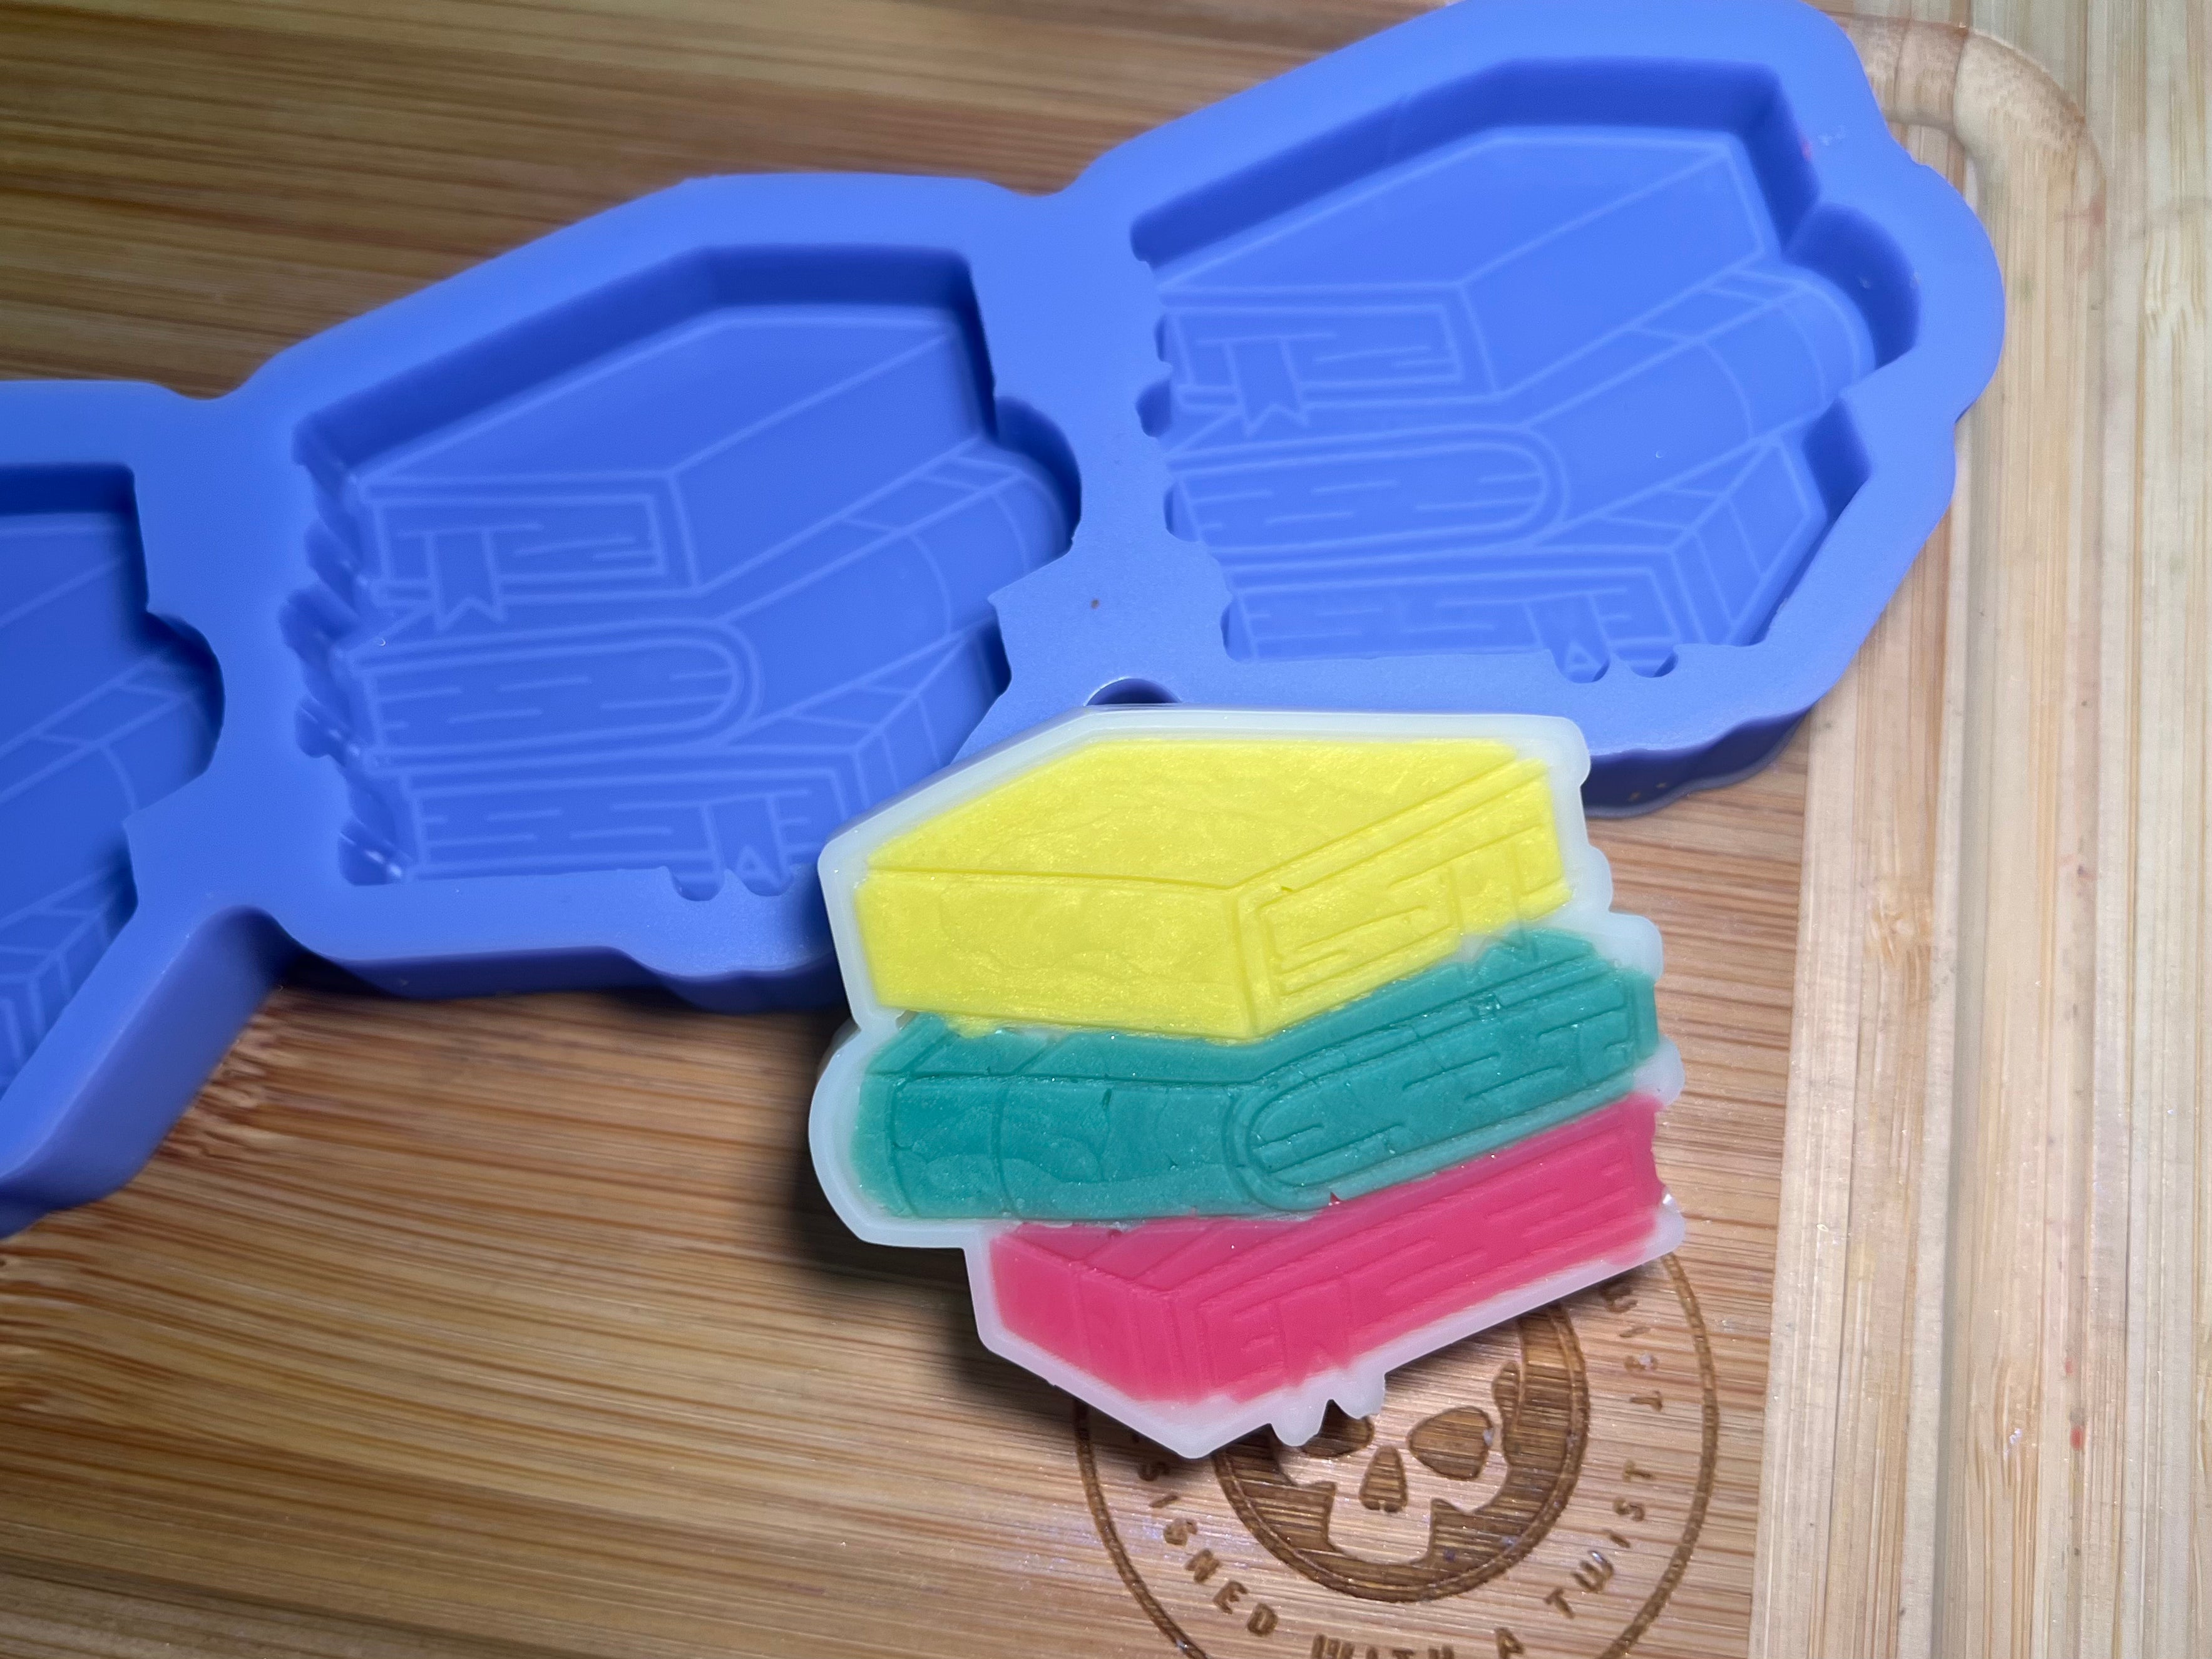 Fairytale Book Stack Wax Melt Silicone Mold - Designed with a Twist - Top quality silicone molds made in the UK.